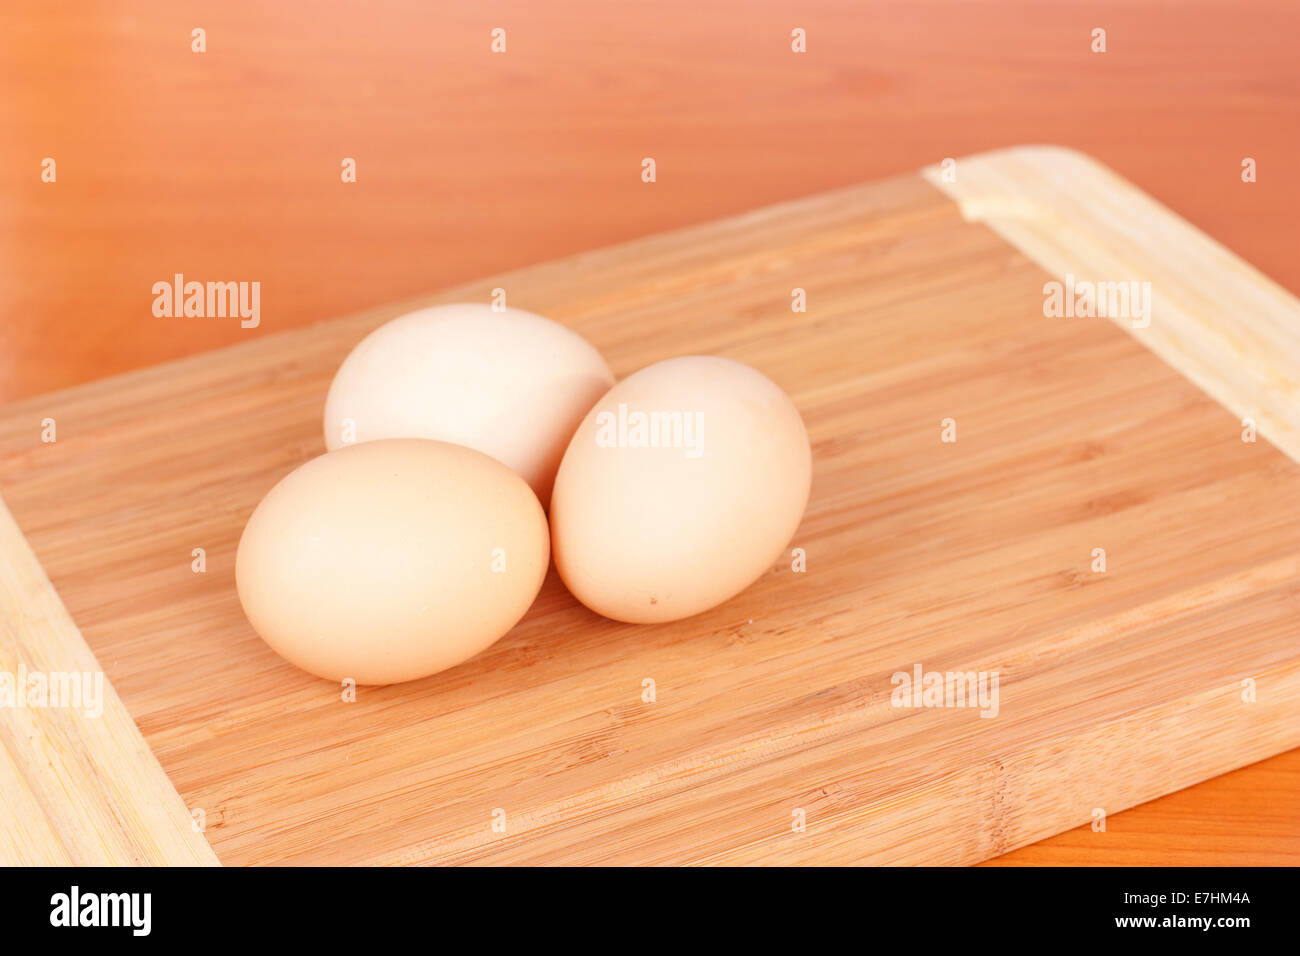 Three brown eggs closeup on wooden background Stock Photo